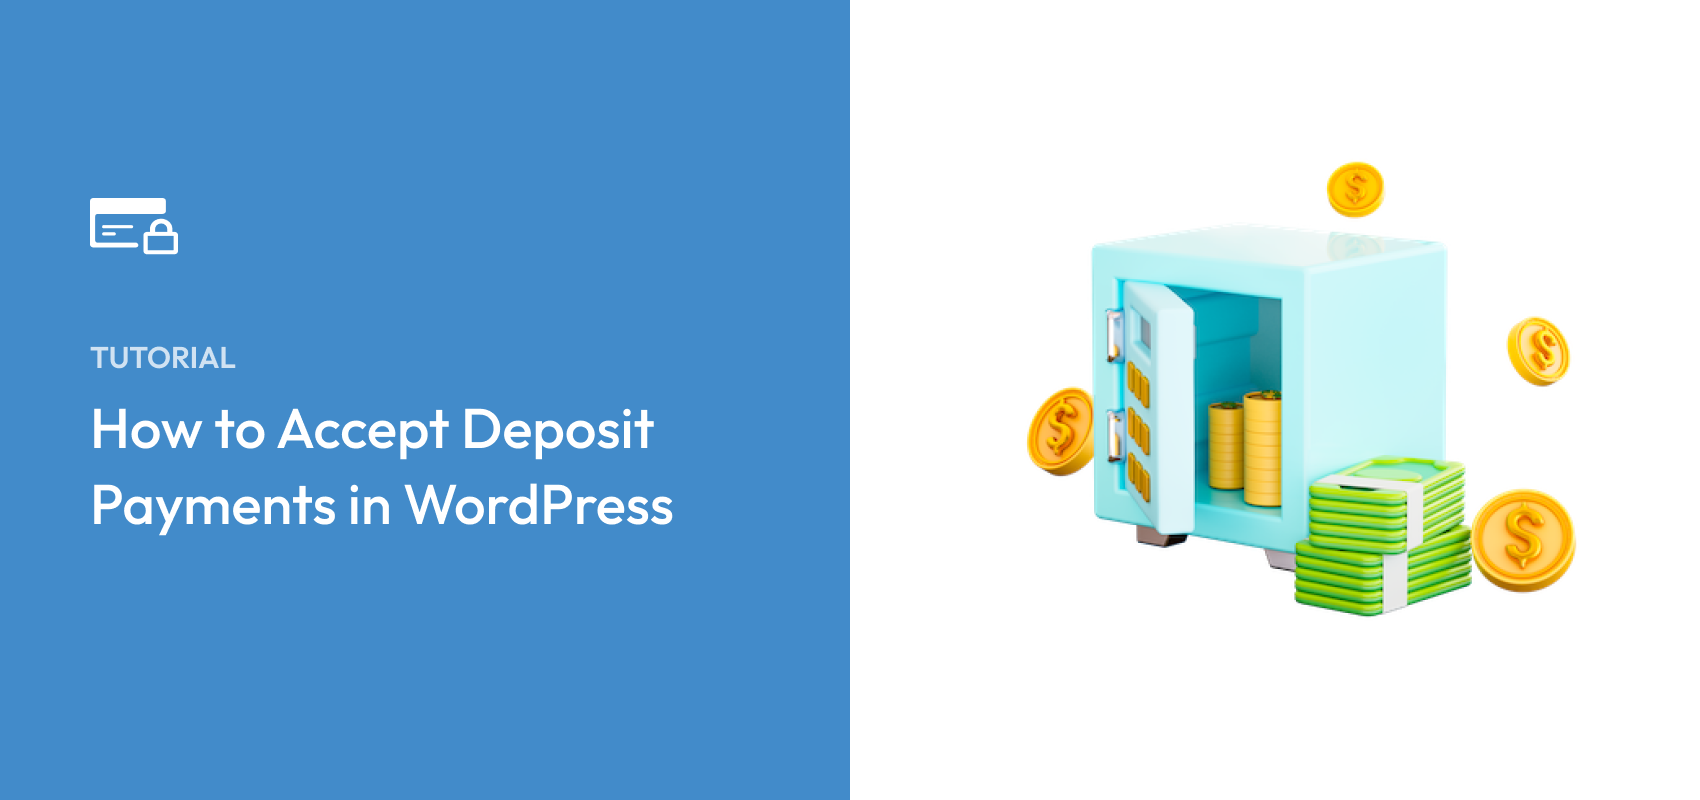 How to Accept Deposit Payments in WordPress